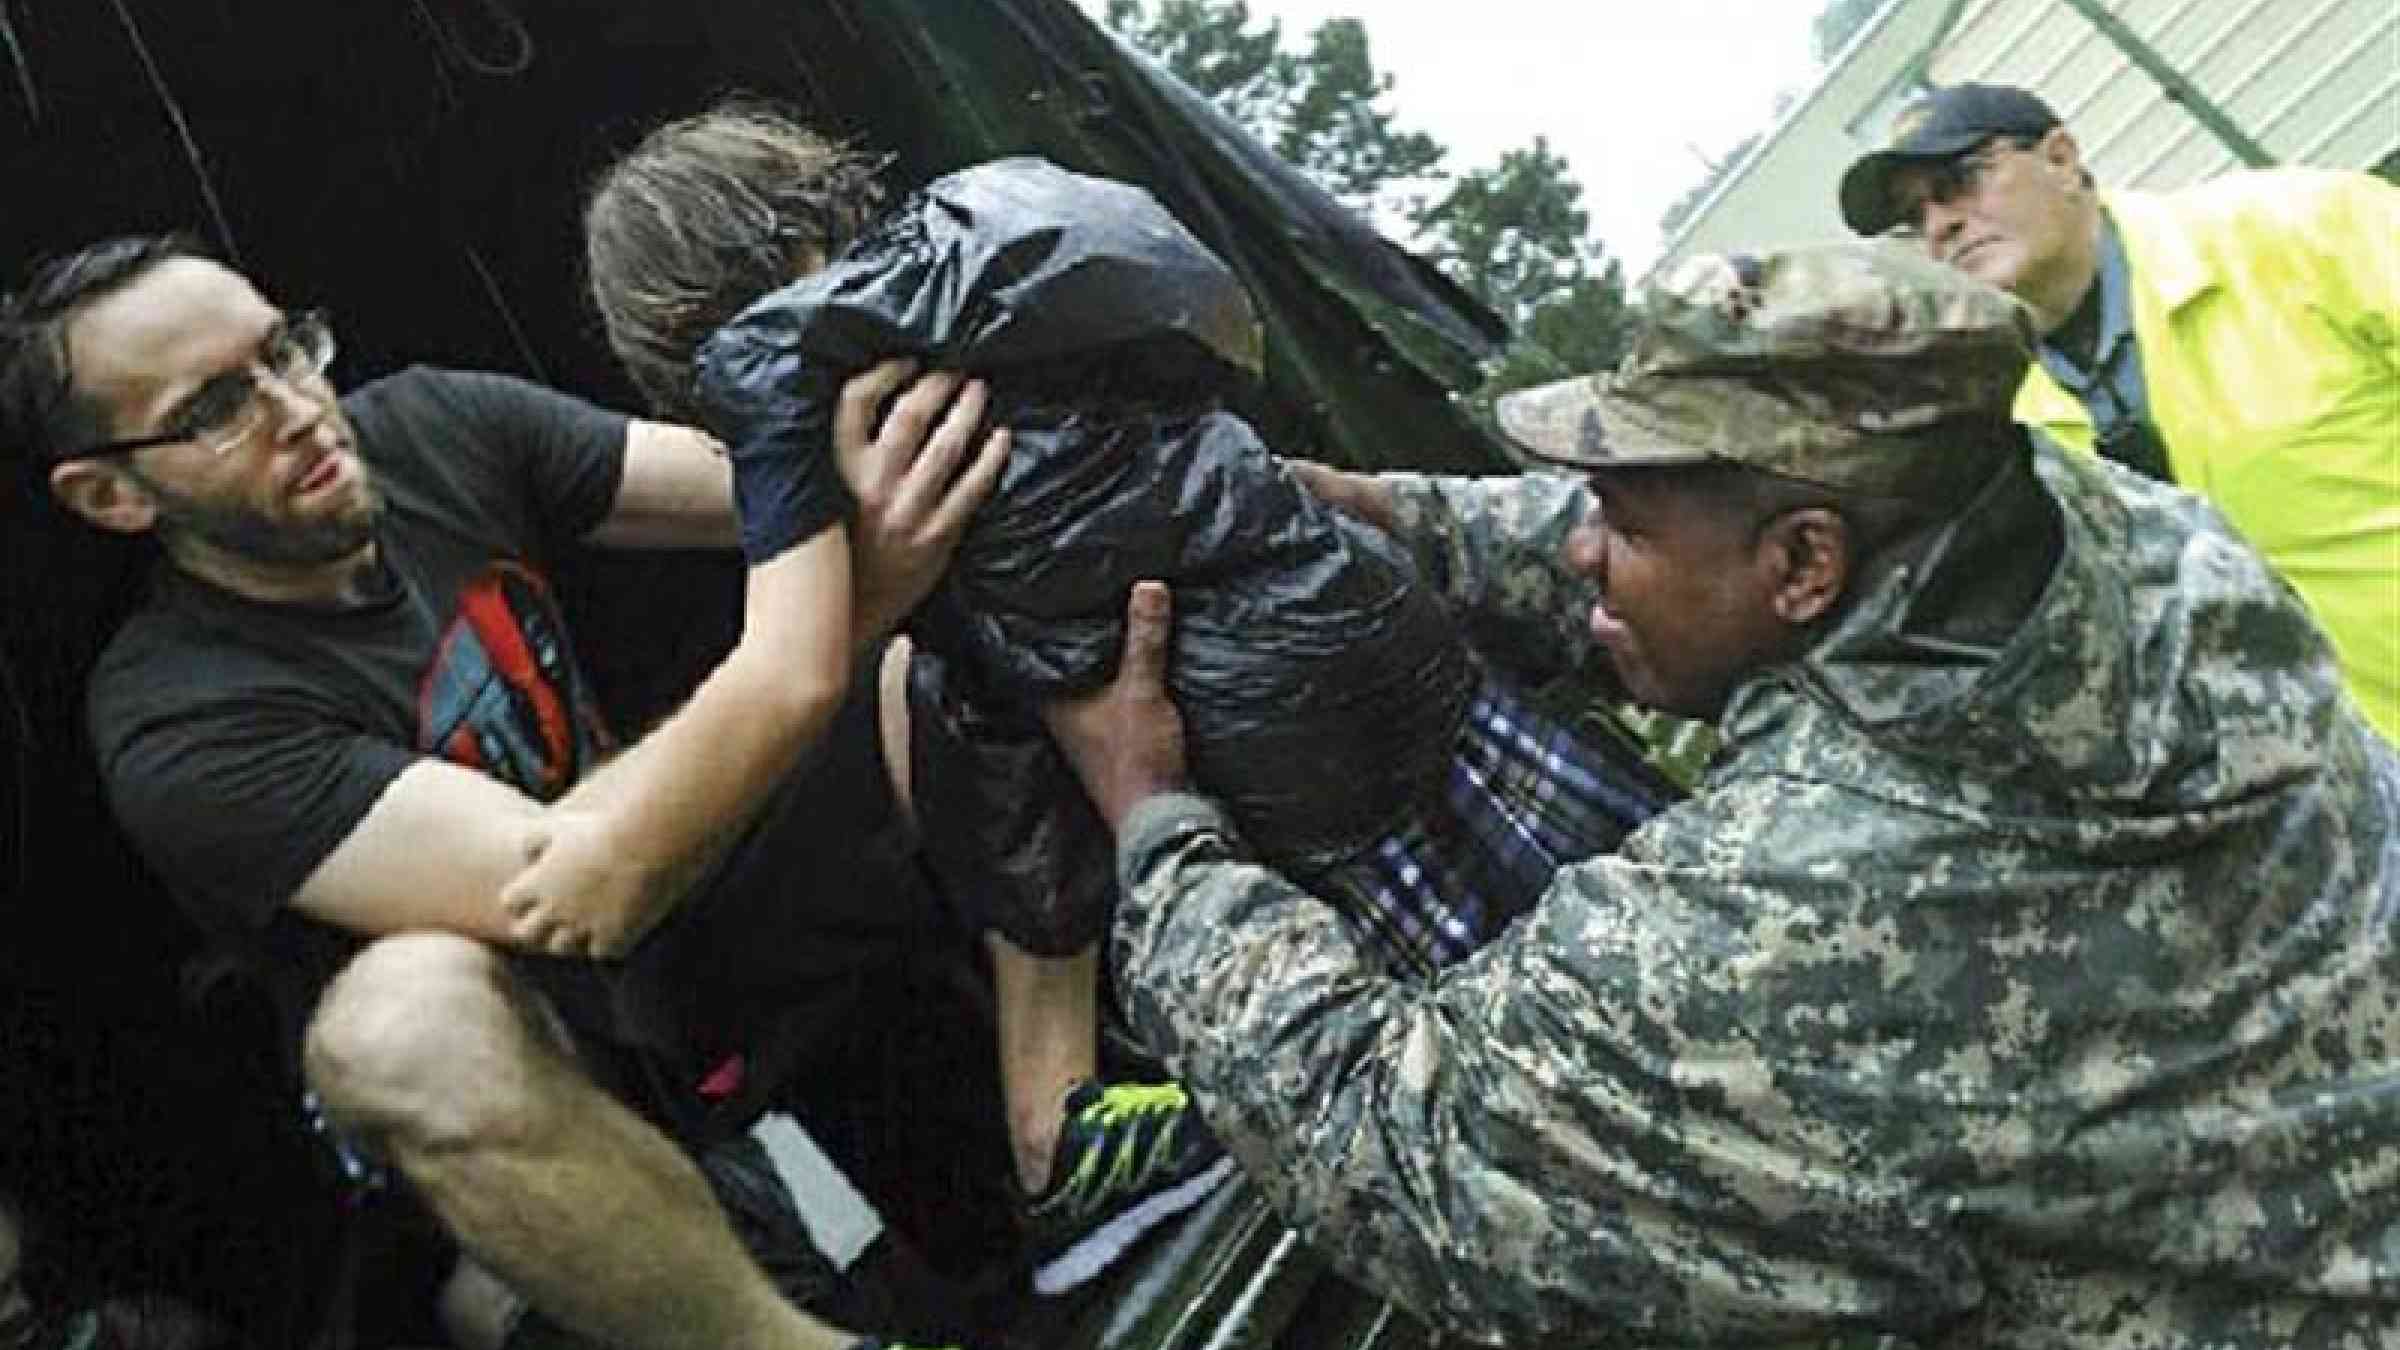 The US National Guard is taking part in flood rescue operations across Louisiana (Photo: US Department of Defense)